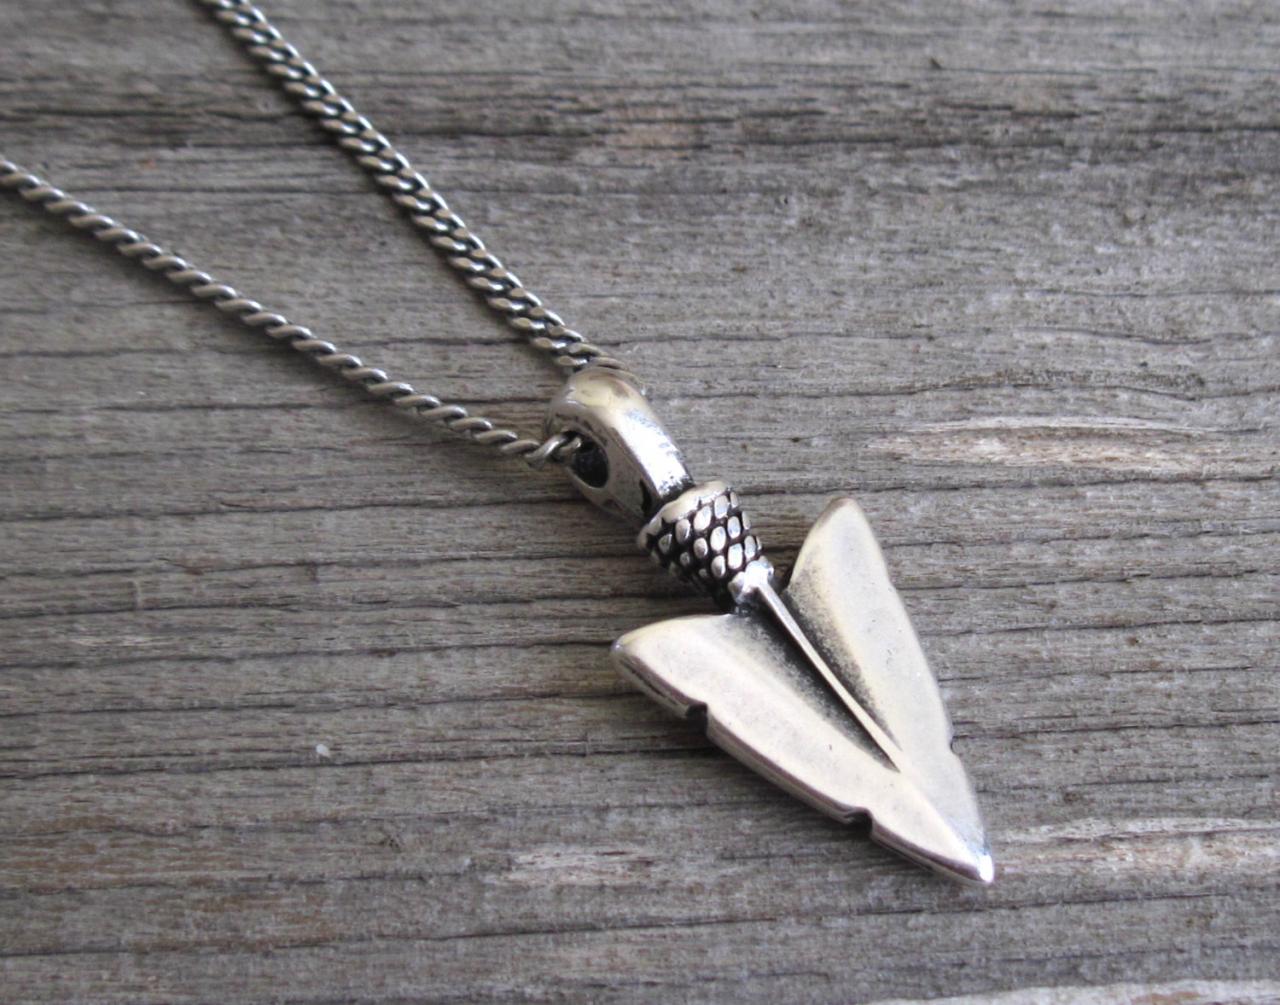 Men's Necklace - Blackend Silver Plated Spear Pendant - Mens Jewelry - Spear Jewelry - Gift For Him